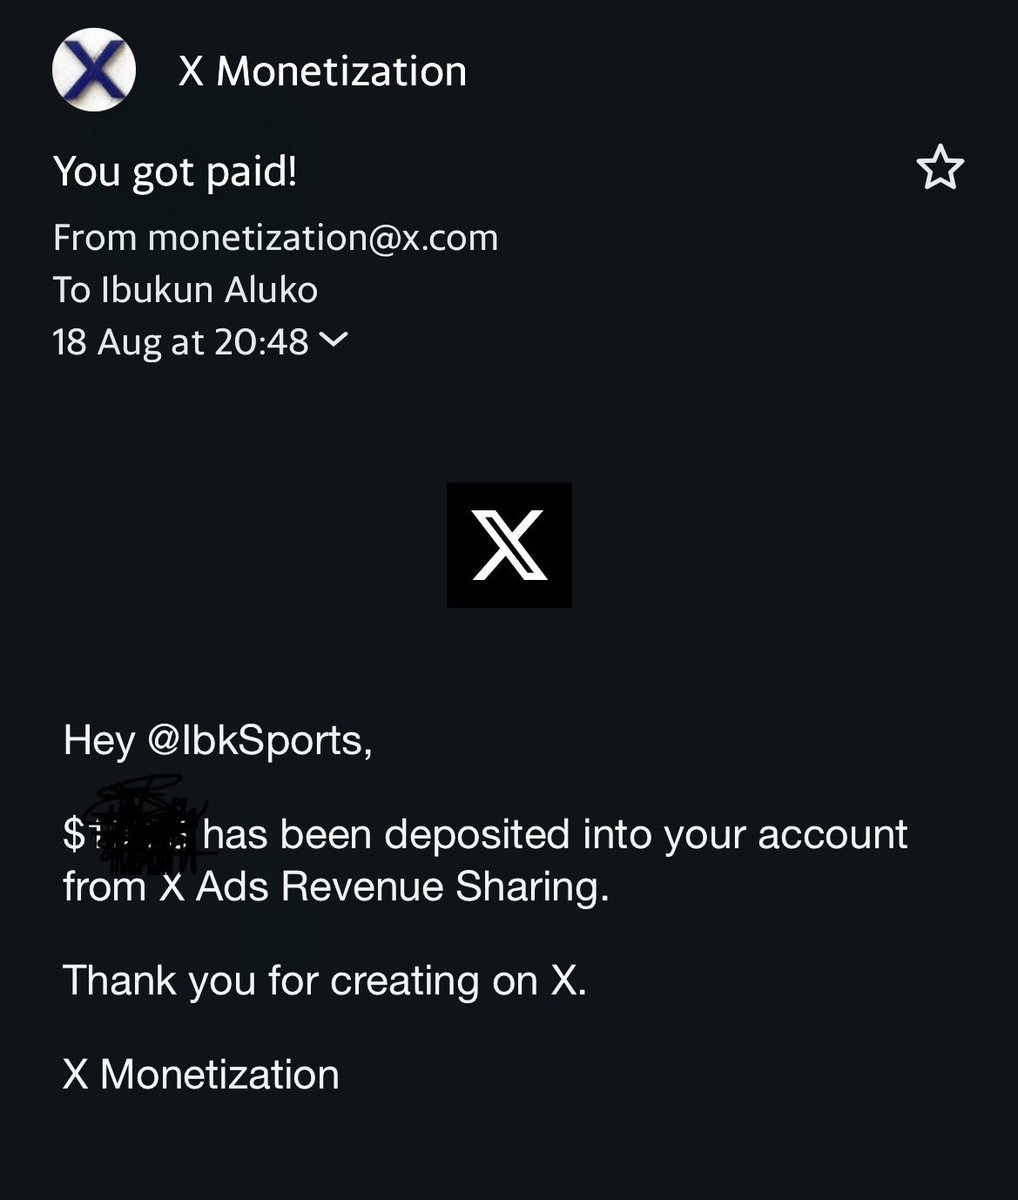 Make money easily on X(formerly twitter). Drop your handles if you want to monetize your account, get verified, follow all the handles and start tweeting more. Retweet for smaller accounts to see this tweet.. We all need the Elon Musk money, all the best guys.🙏🏾